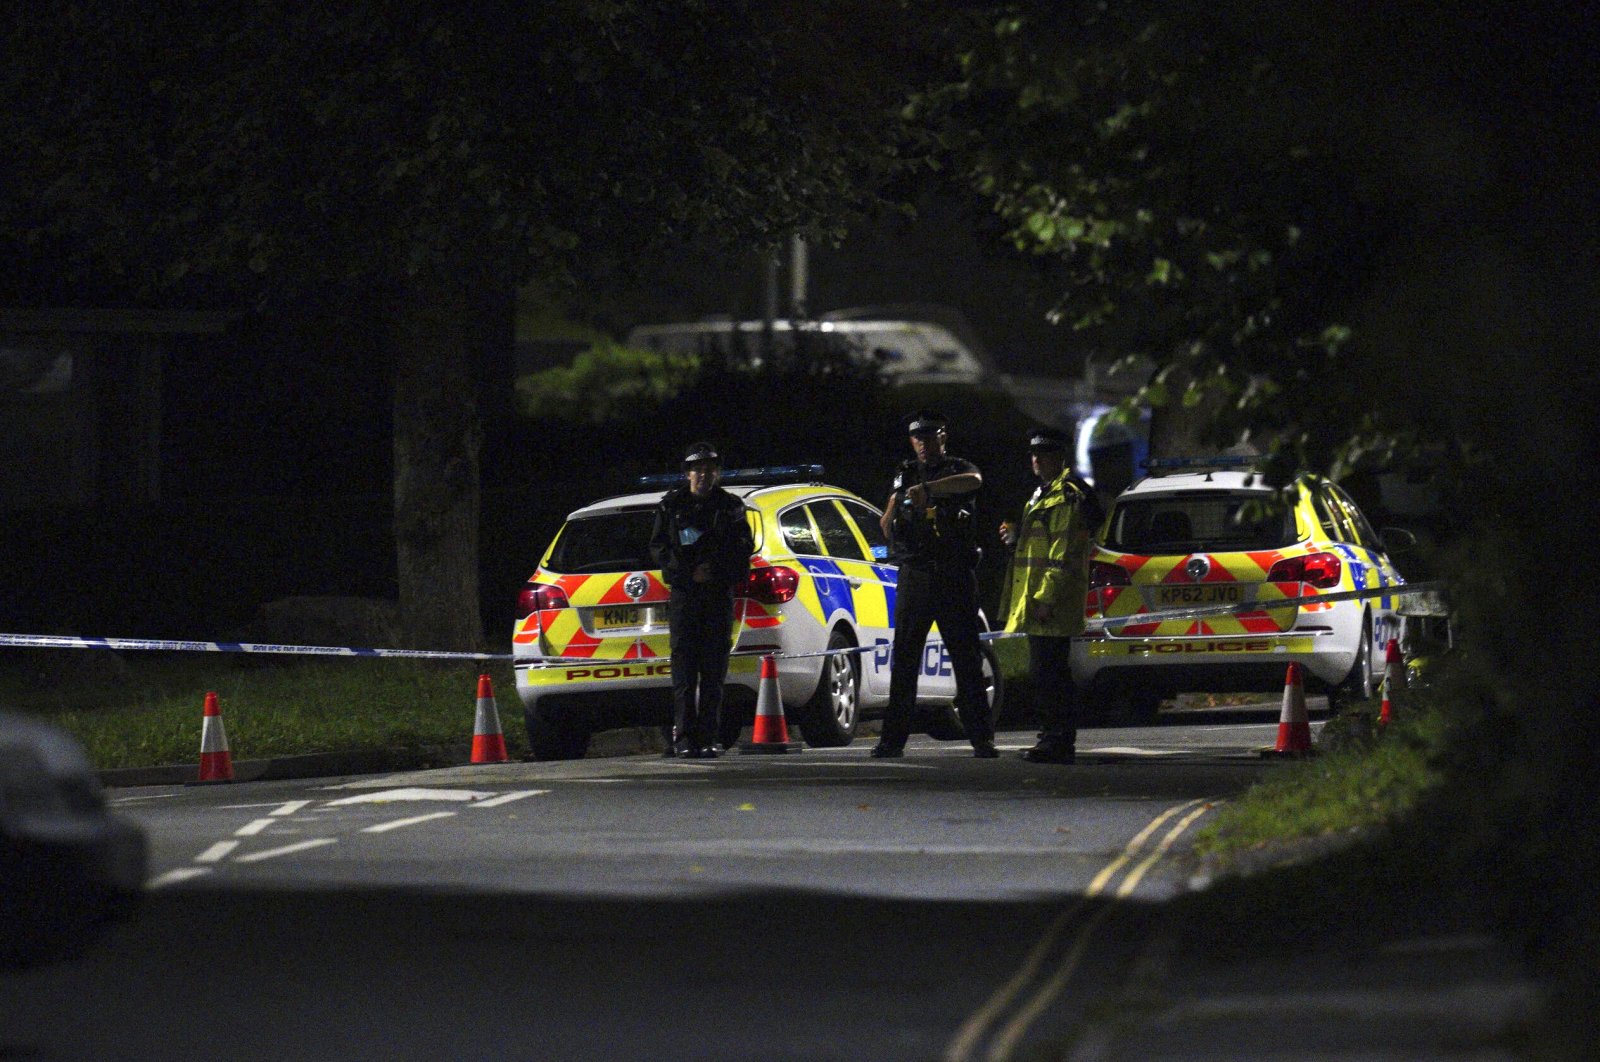 Emergency services are seen near the scene of the shooting on Biddick Drive, in the Keyham area of Plymouth, southwest England, Aug. 12, 2021. (AP Photo)